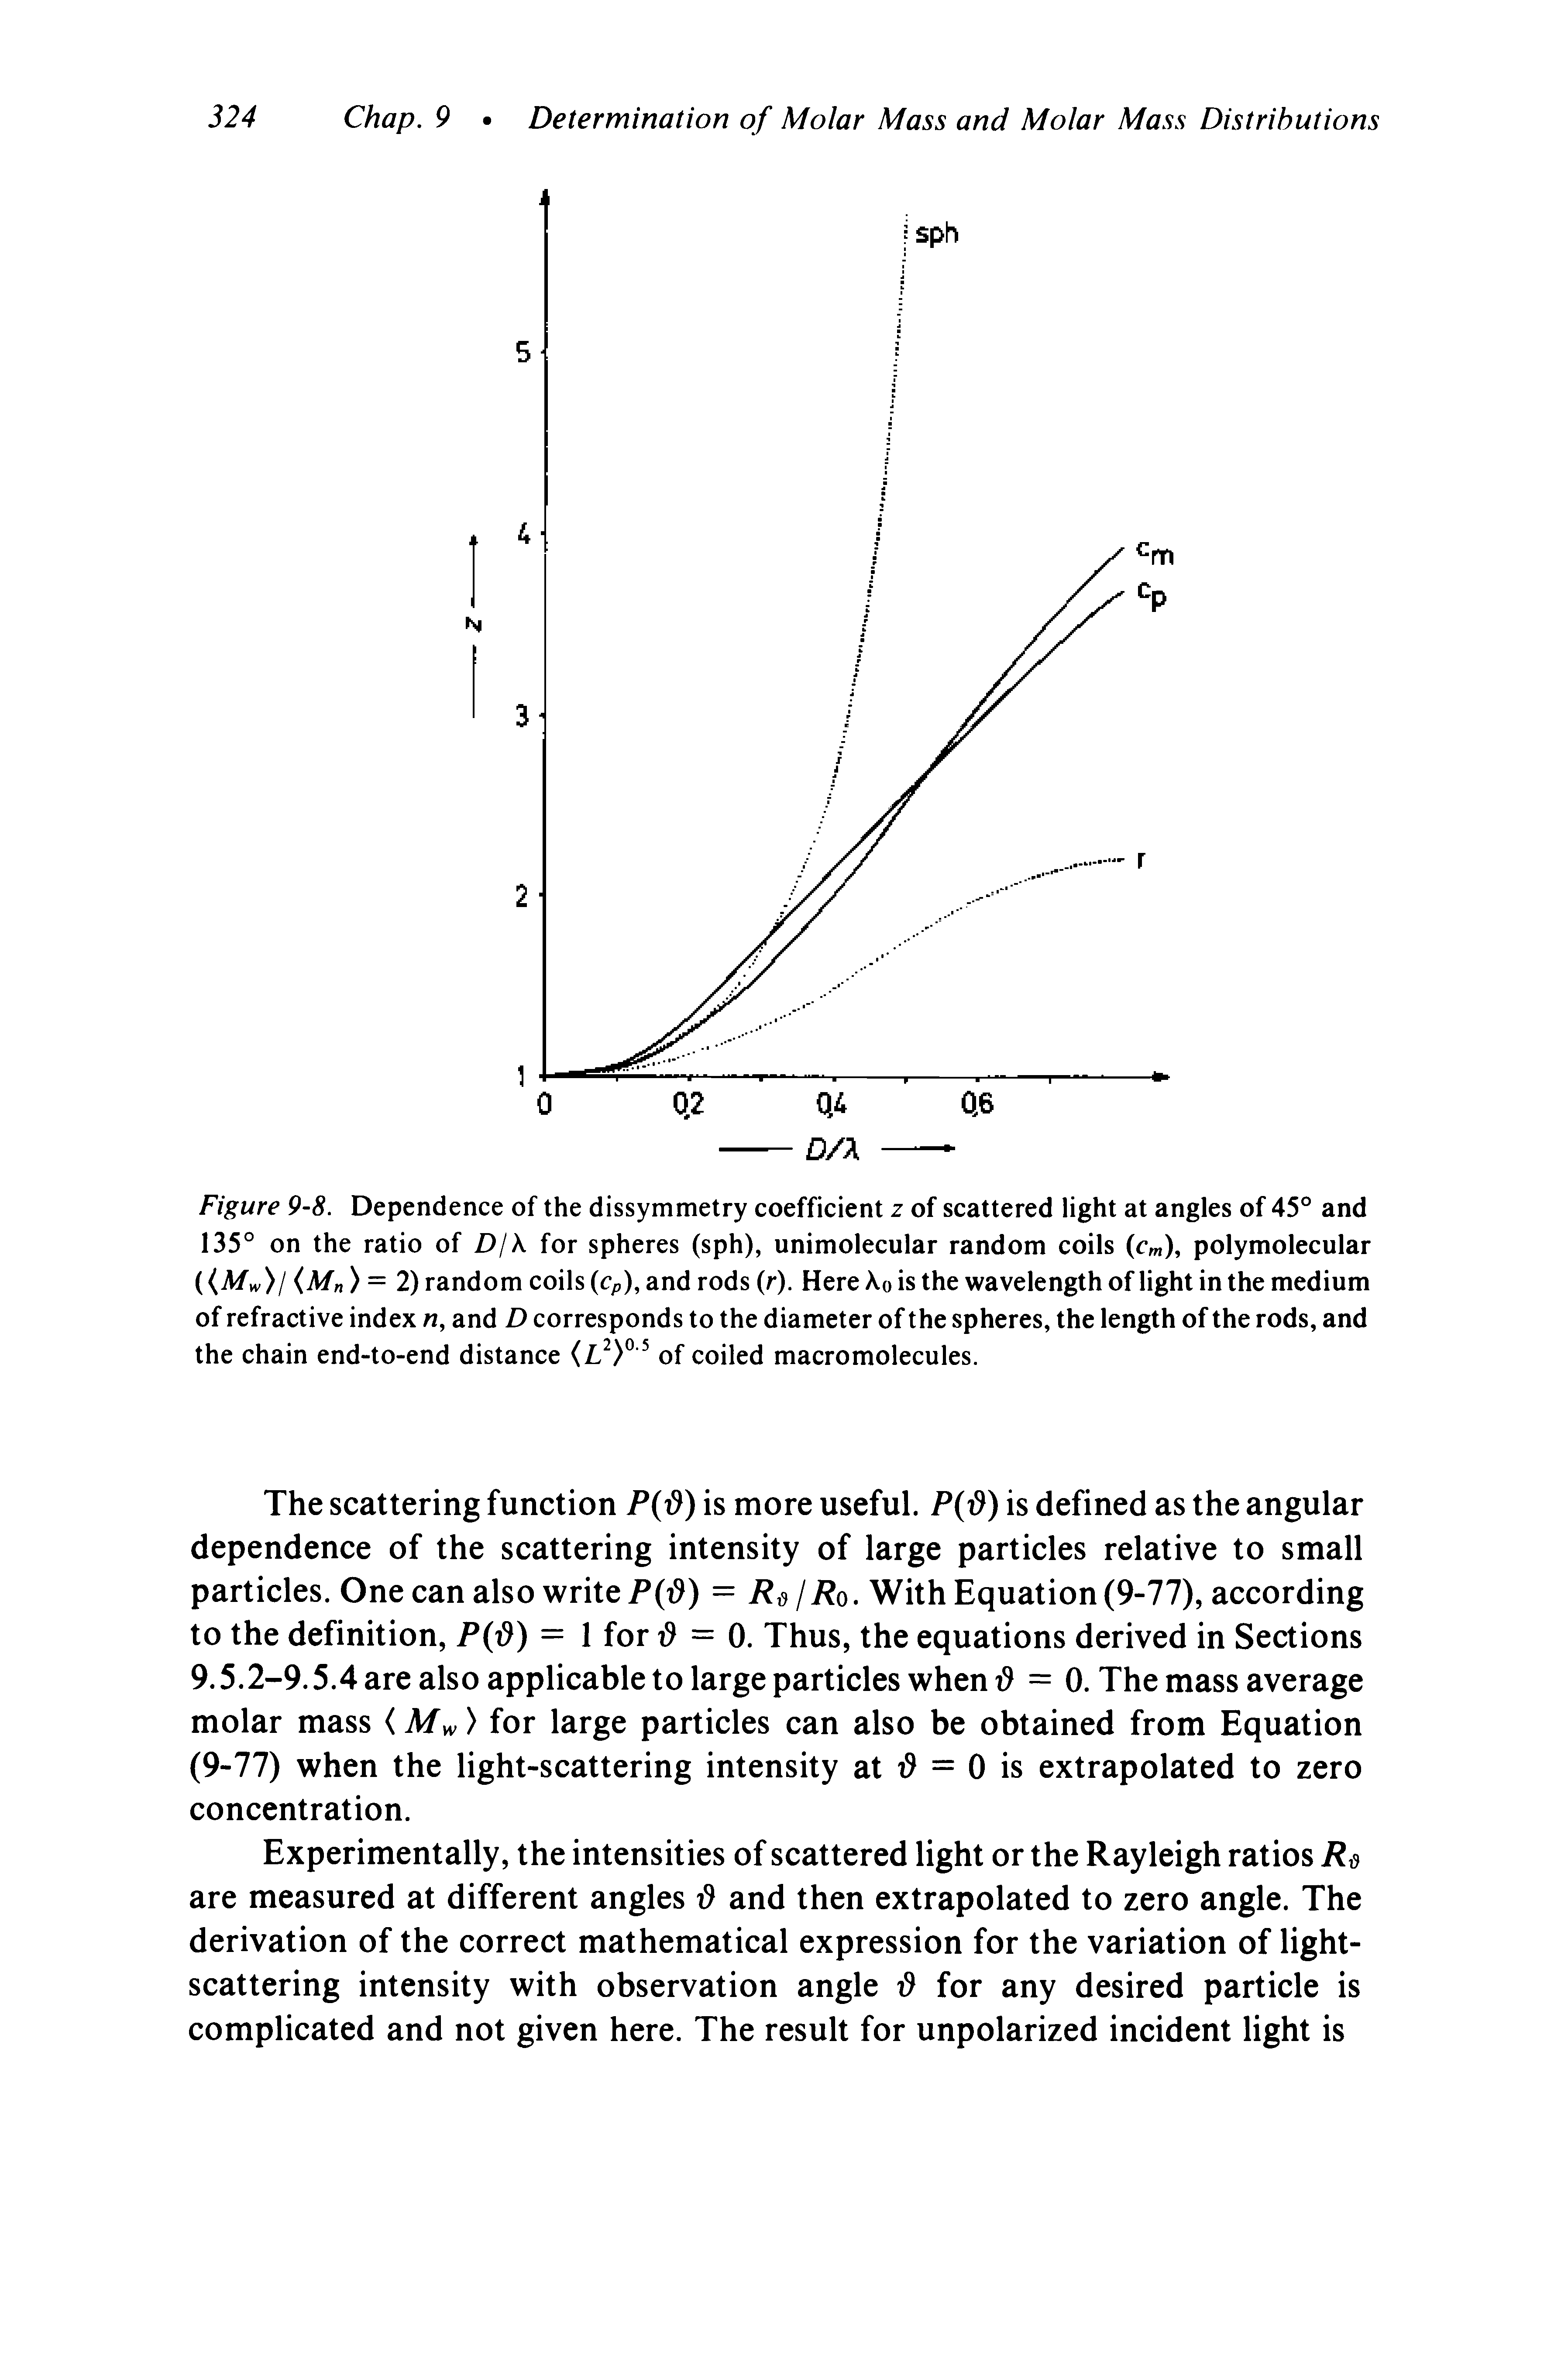 Figure 9-8. Dependence of the dissymmetry coefficient z of scattered light at angles of 45° and 135° on the ratio of >/X for spheres (sph), unimolecular random coils cm)y polymolecular (Mn) = 2) random coils Cp), and rods (r). Here Xo is the wavelength of light in the medium of refractive index n, and D corresponds to the diameter of the spheres, the length of the rods, and the chain end-to-end distance of coiled macromolecules.